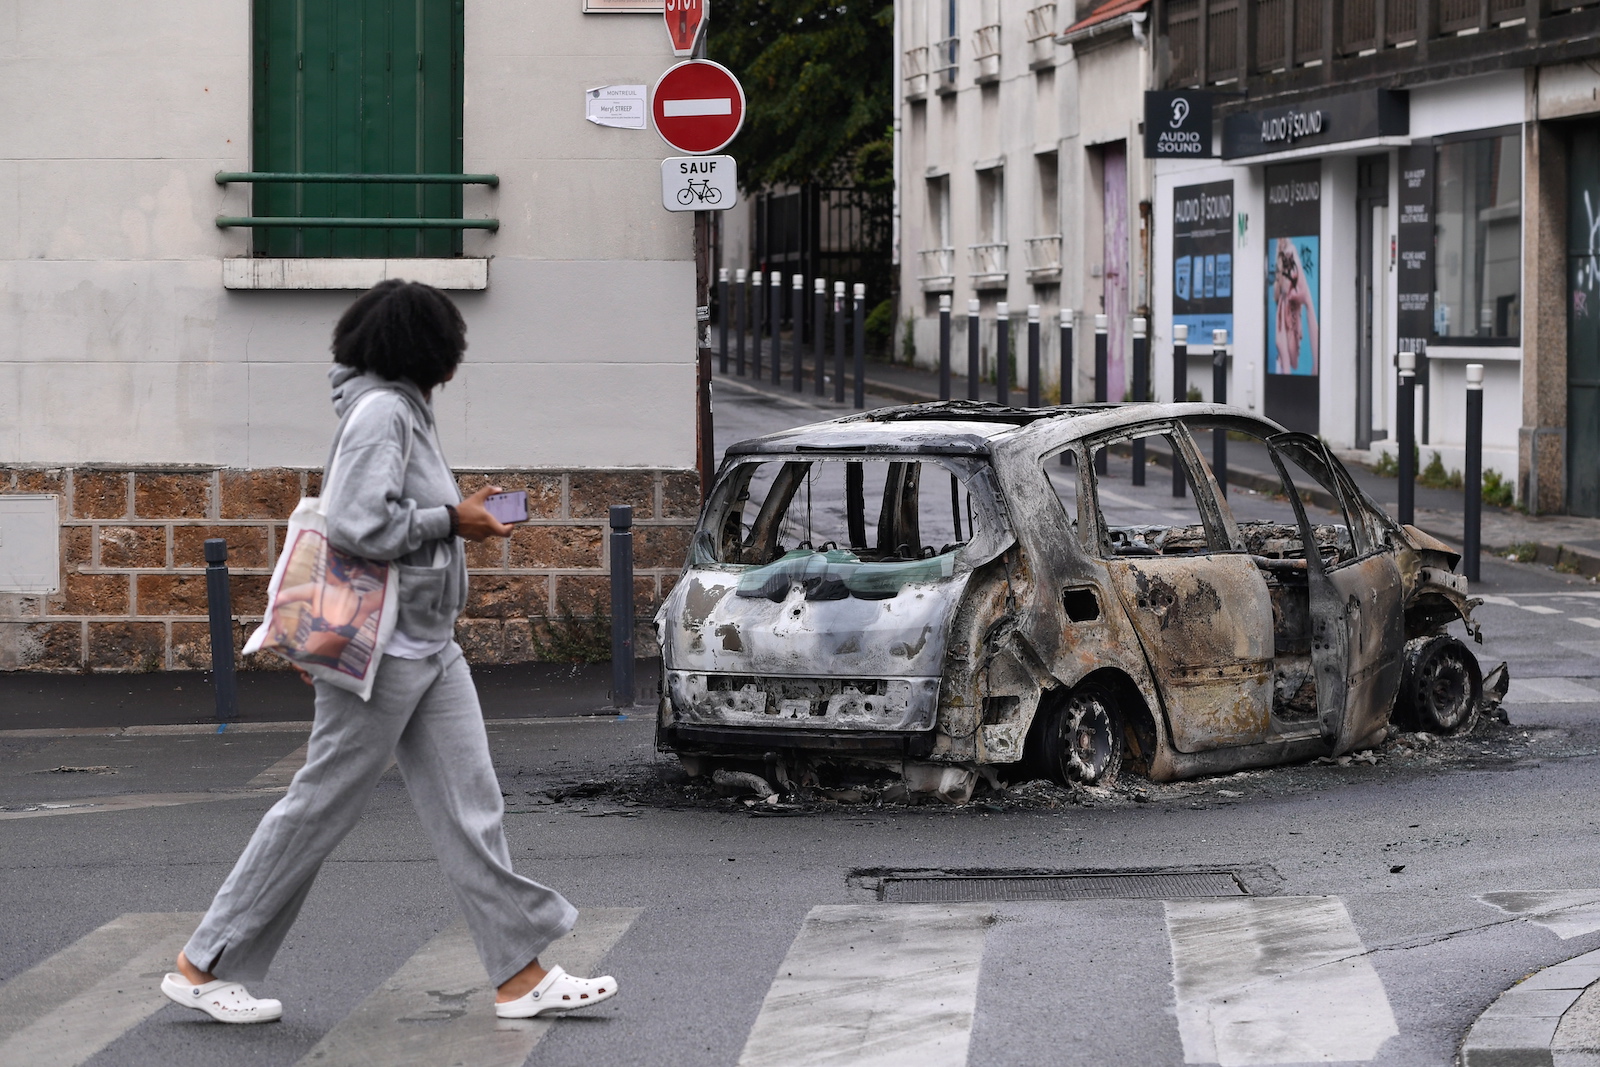 epa10720367 A person walks near the remains of a burnt out car following a night of looting and rioting in Montreuil, near Paris, France, 01 July 2023. Violence broke out across France over the fatal shooting of a 17-year-old teenager by a police officer during a traffic stop in Nanterre on 27 June.  EPA/JULIEN MATTIA